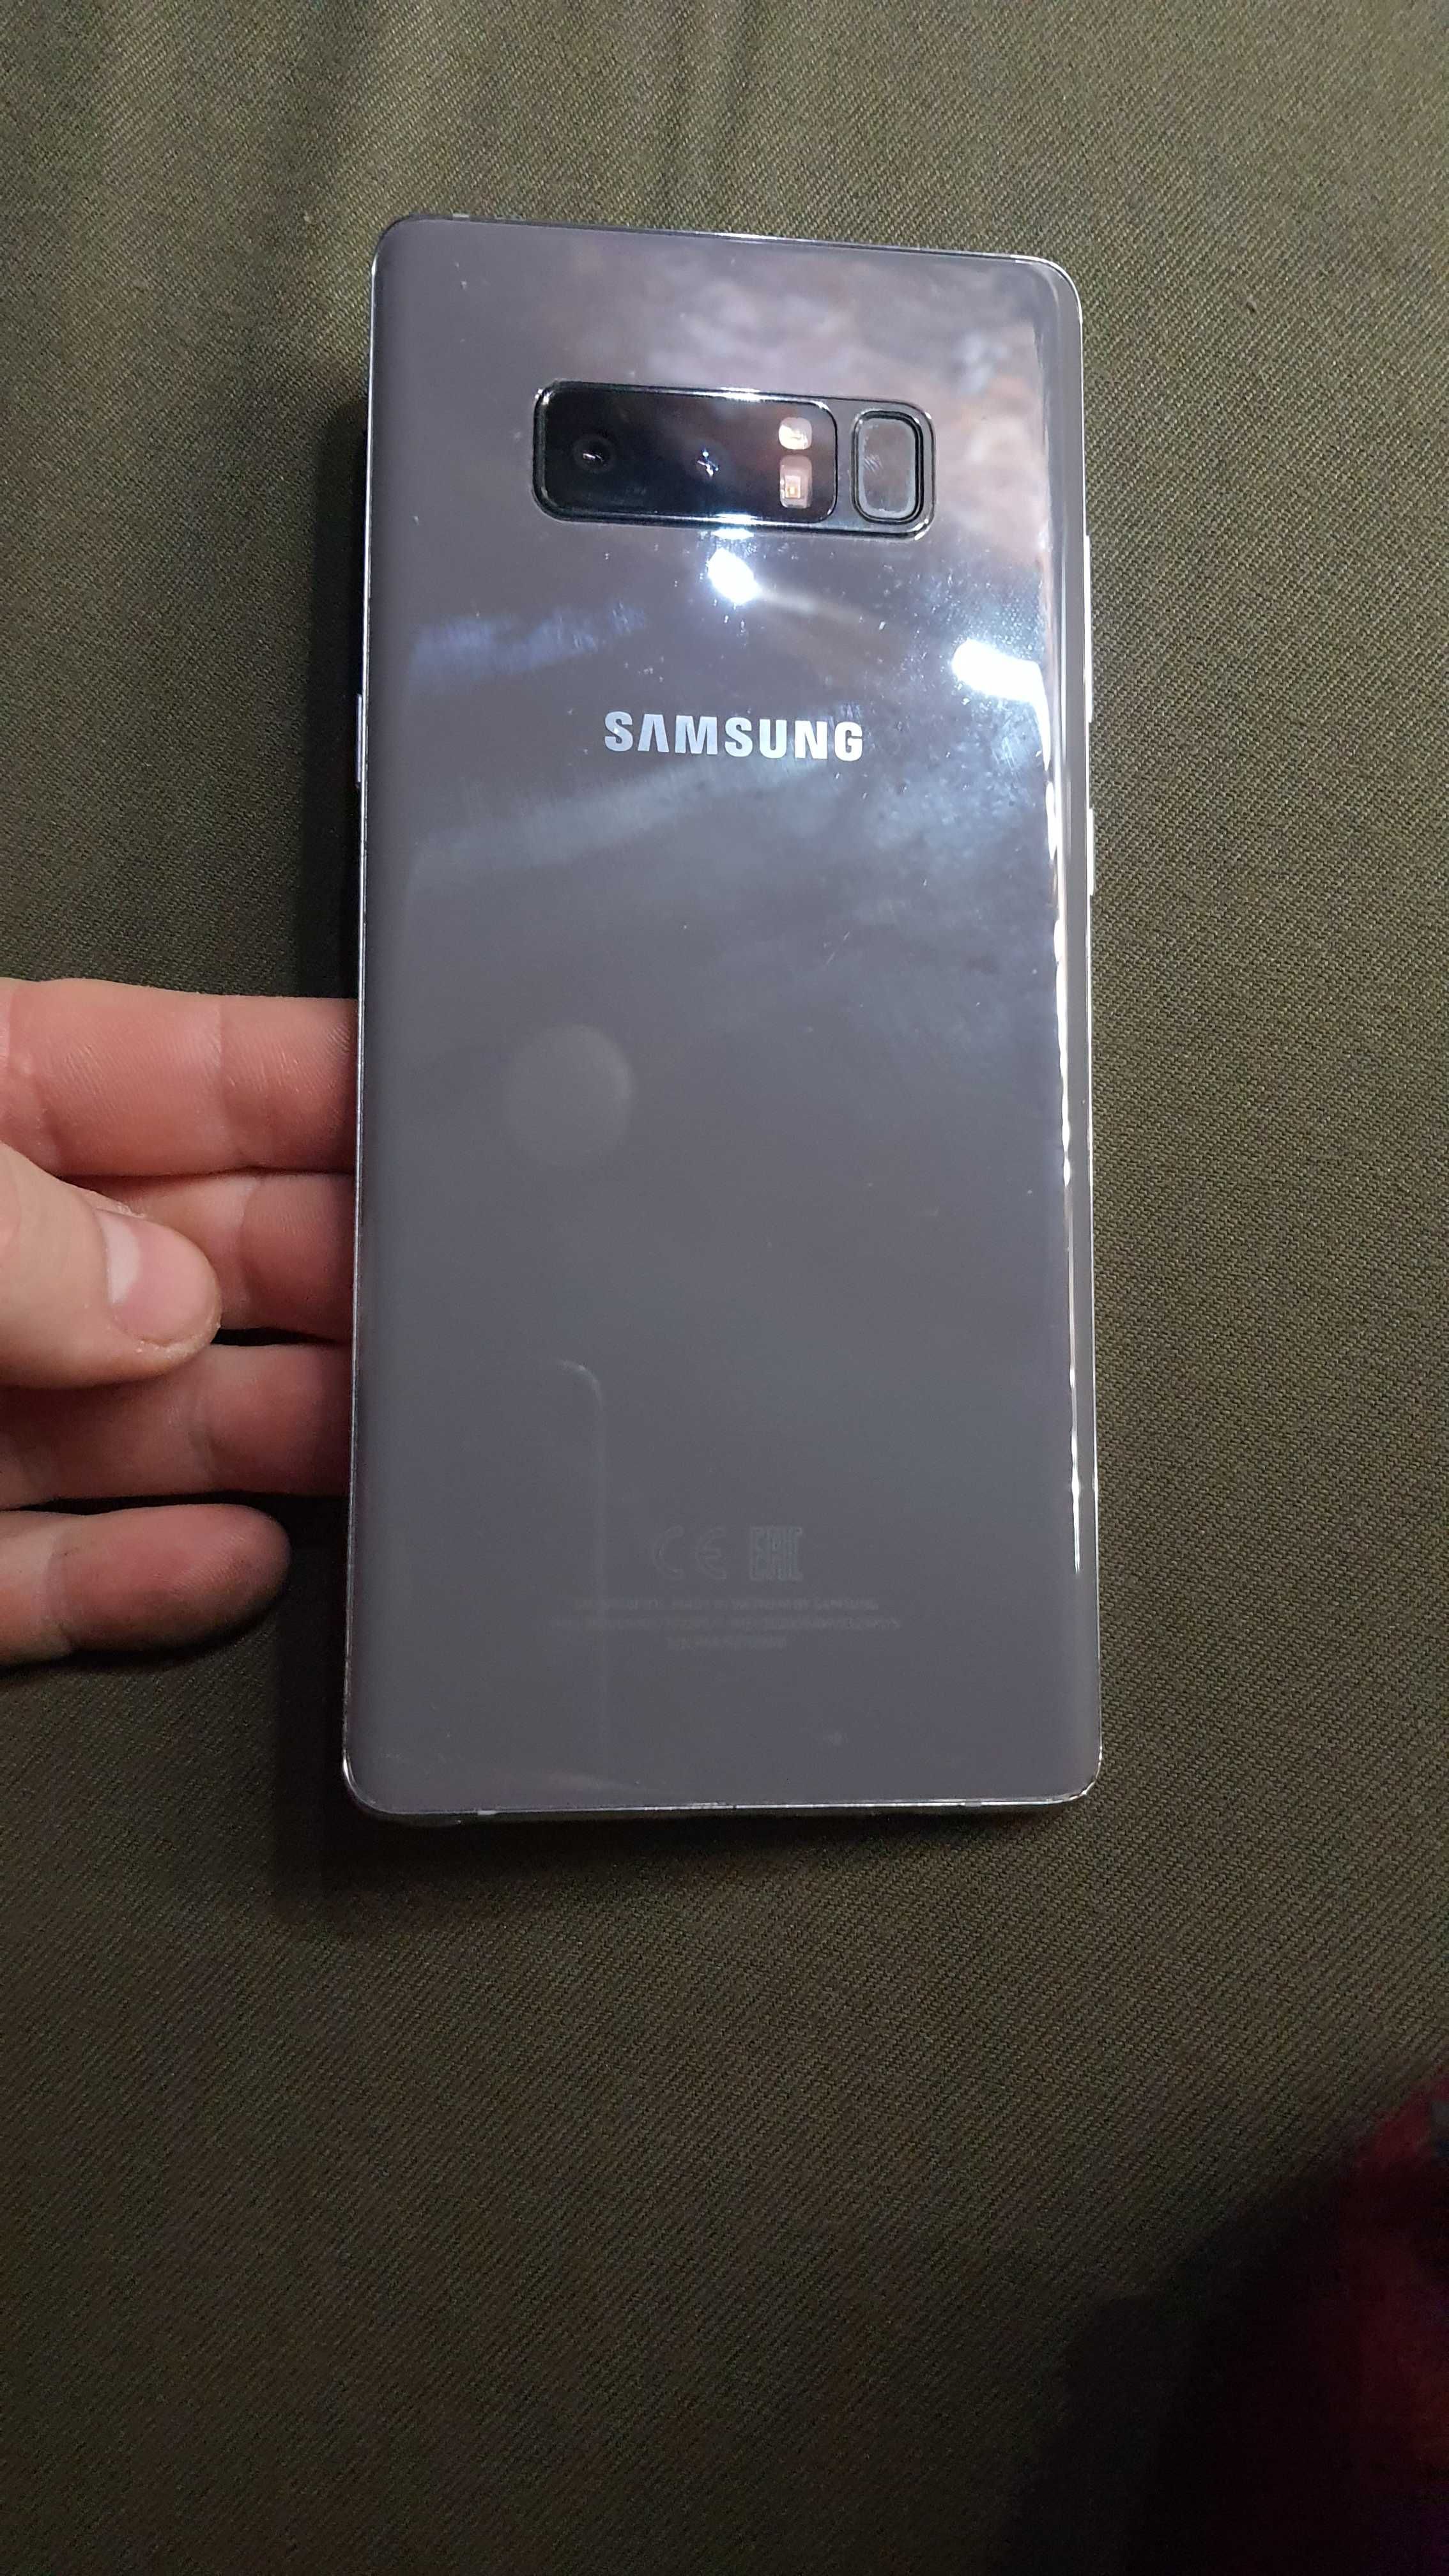 Samsung note 8 duos 64gb